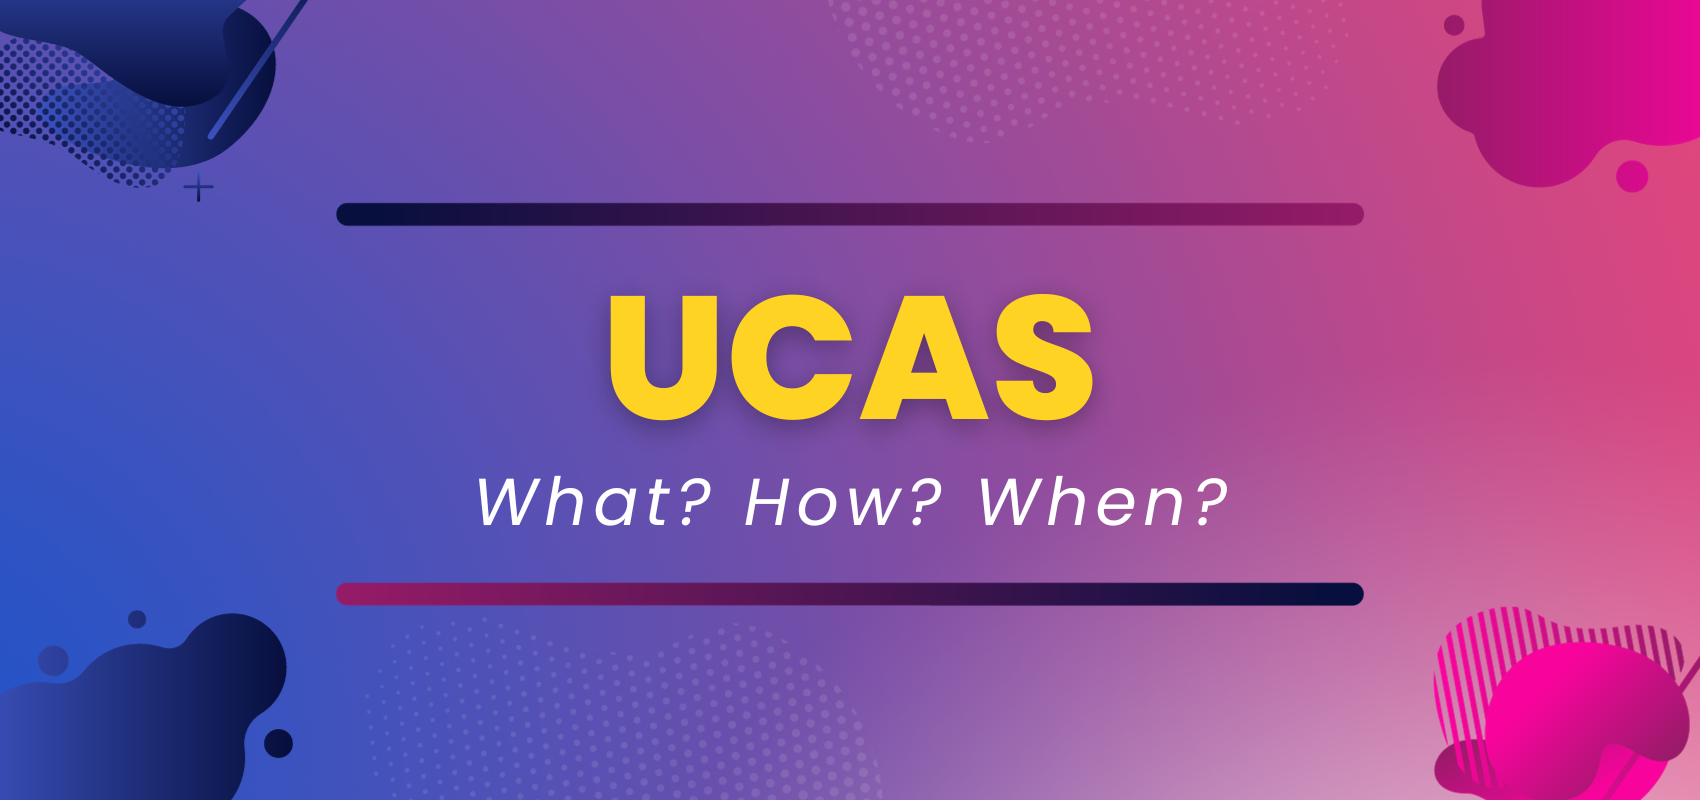 How To Apply To The UK Using UCAS?